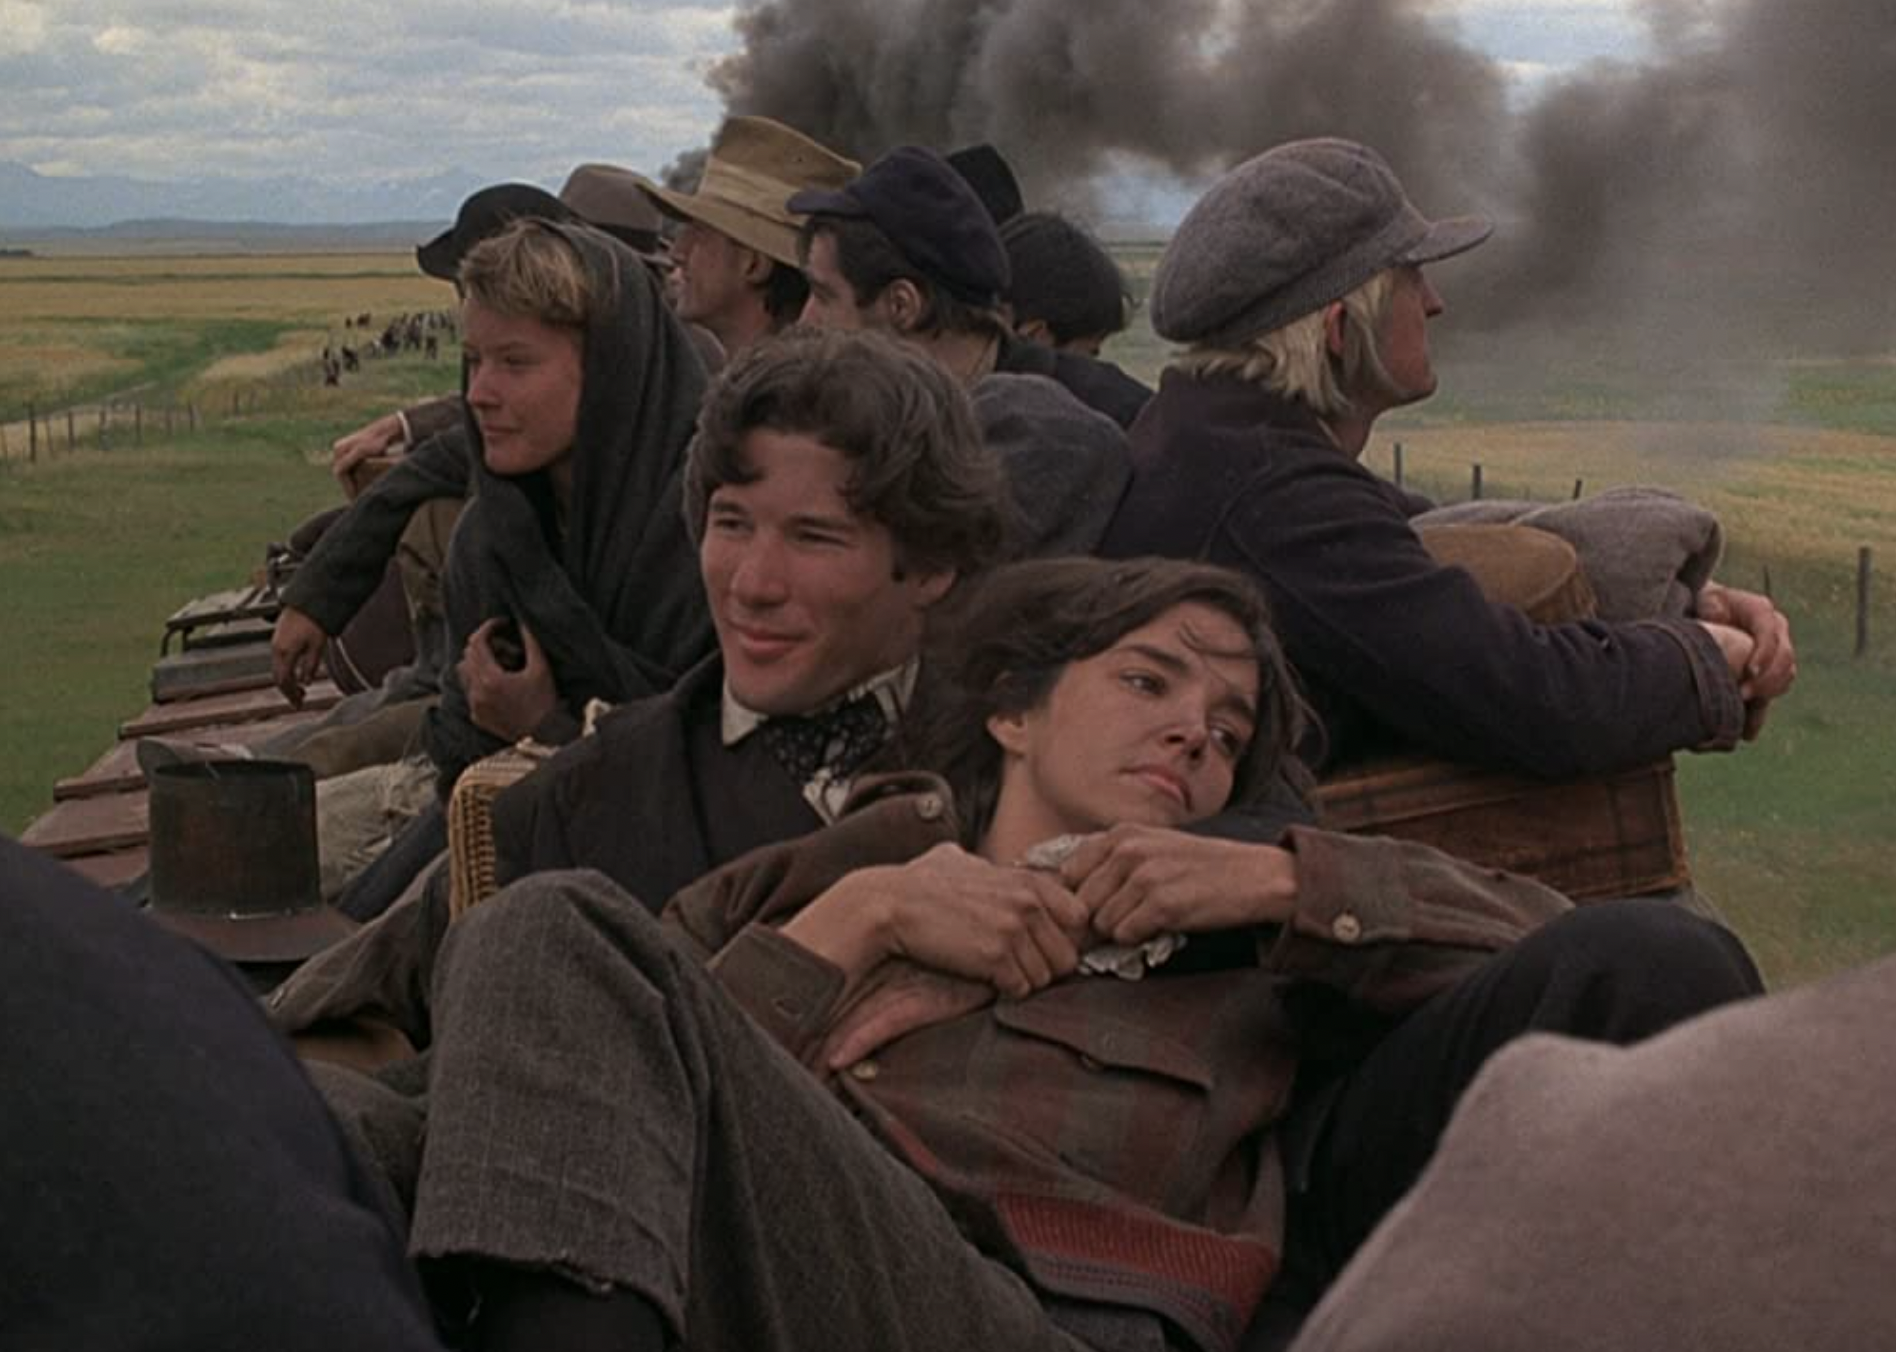 Richard Gere and Brooke Adams in "Days of Heaven".